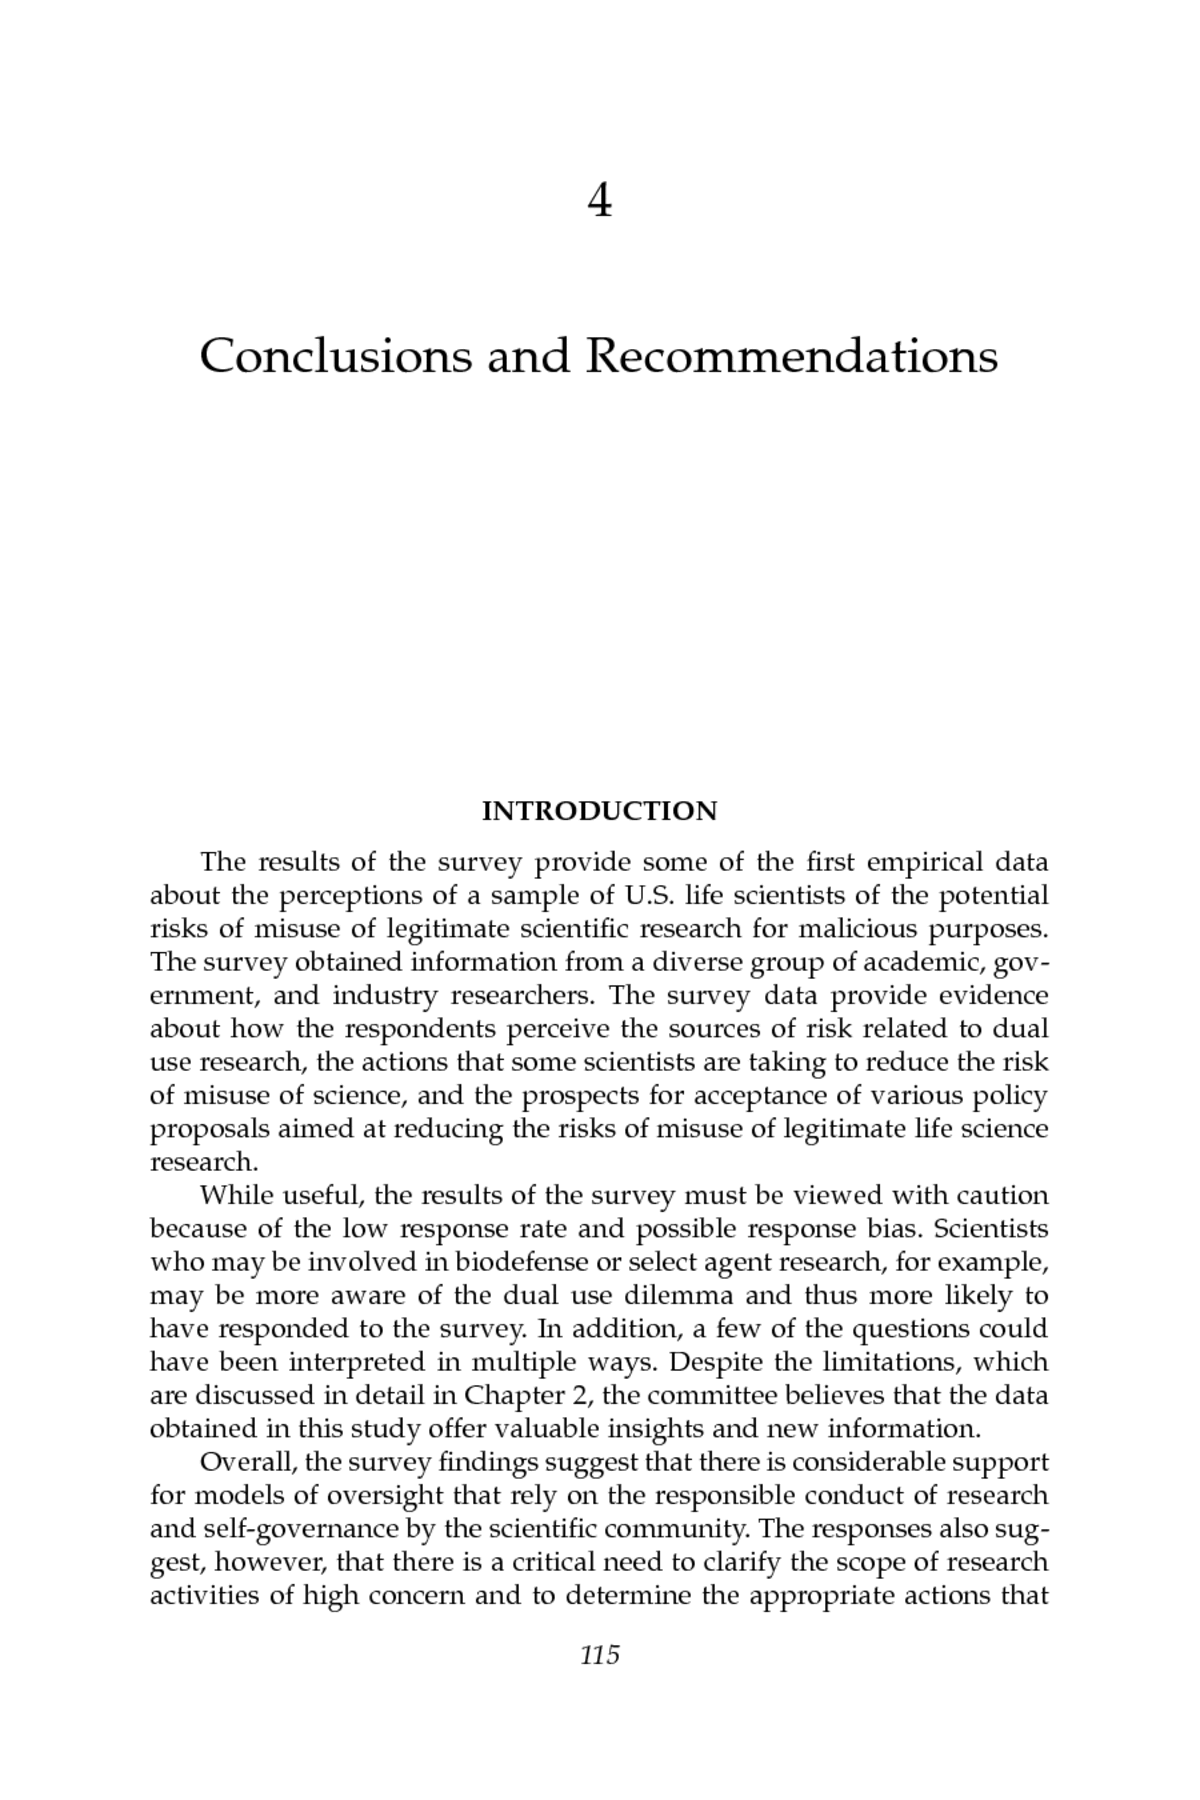 what is recommendation in thesis